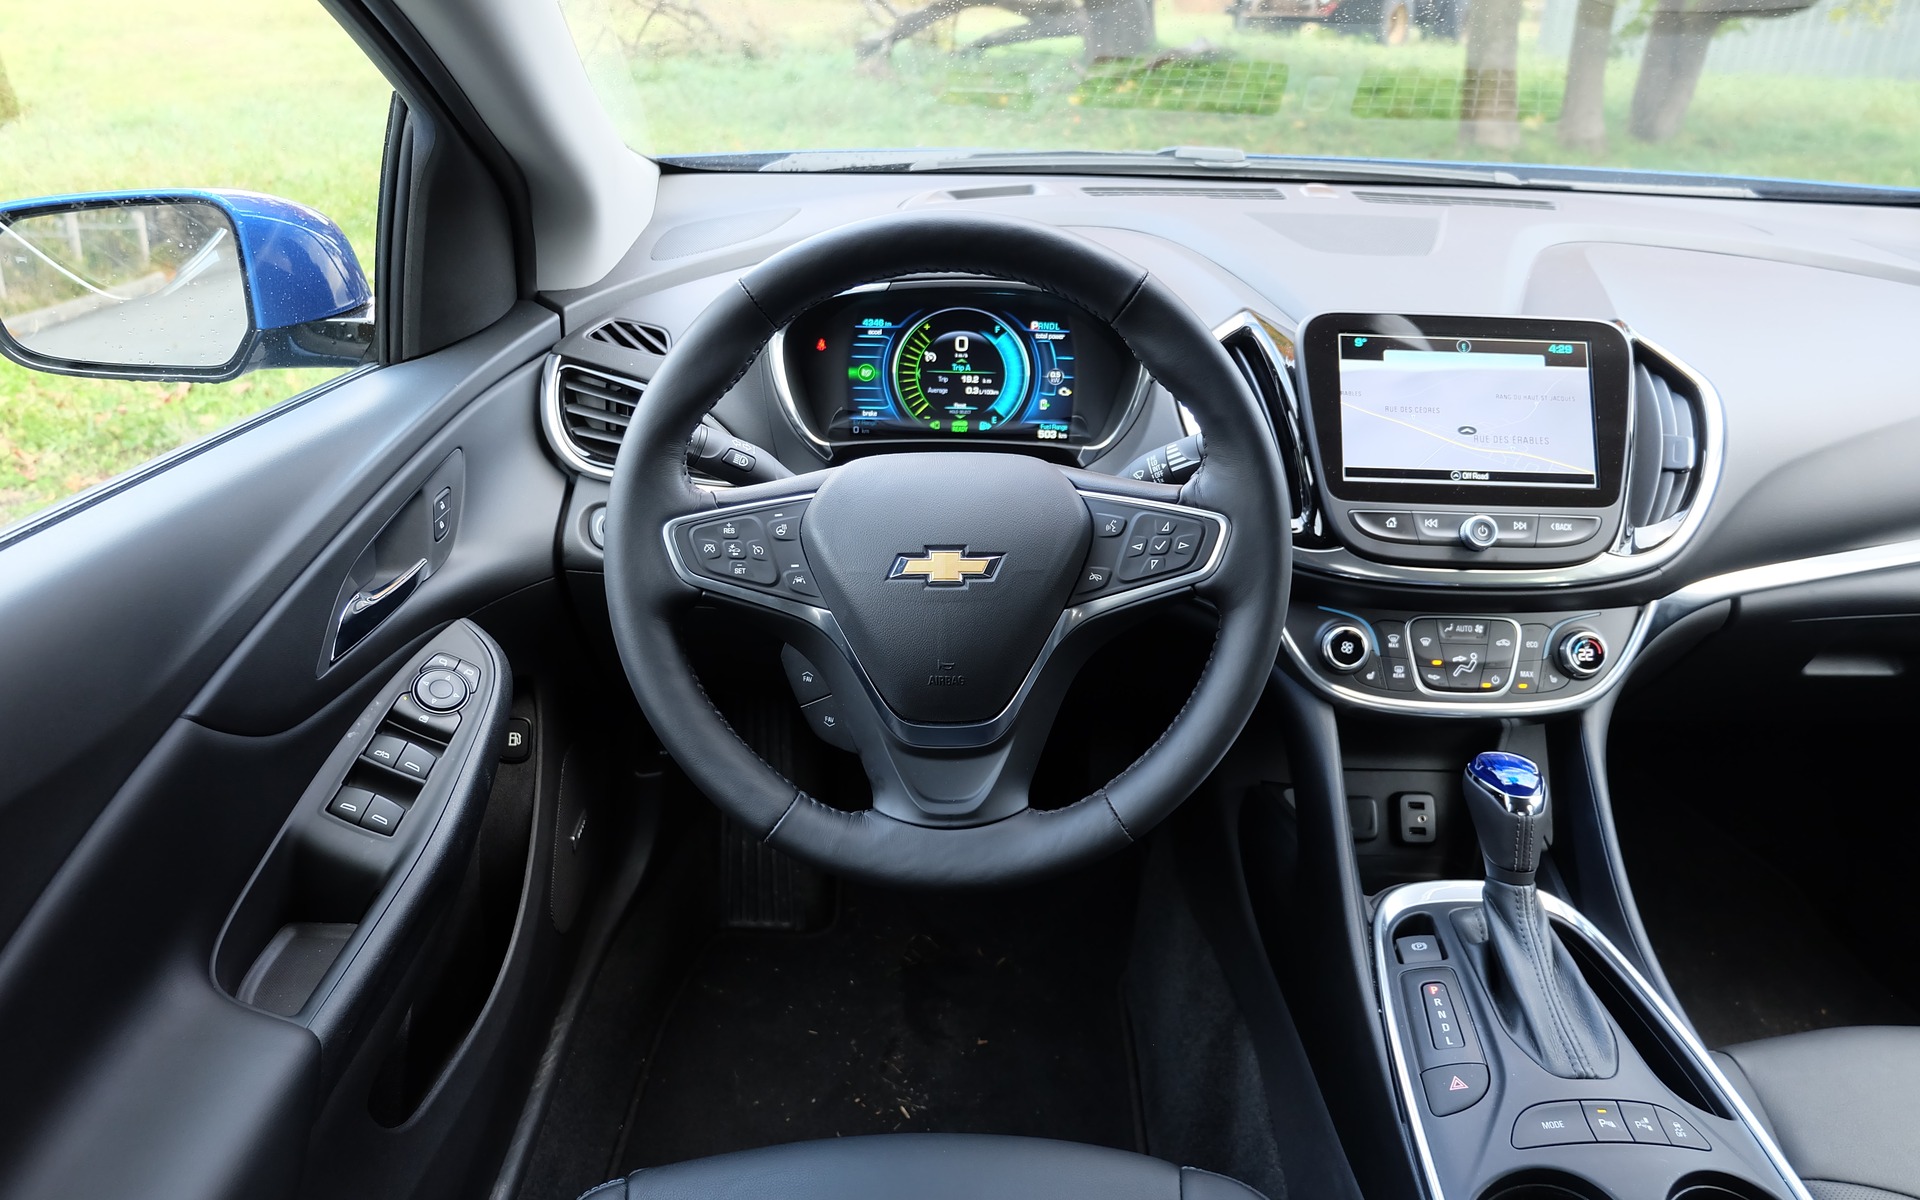 The cockpit's design is now more in line with Chevrolet's other products.